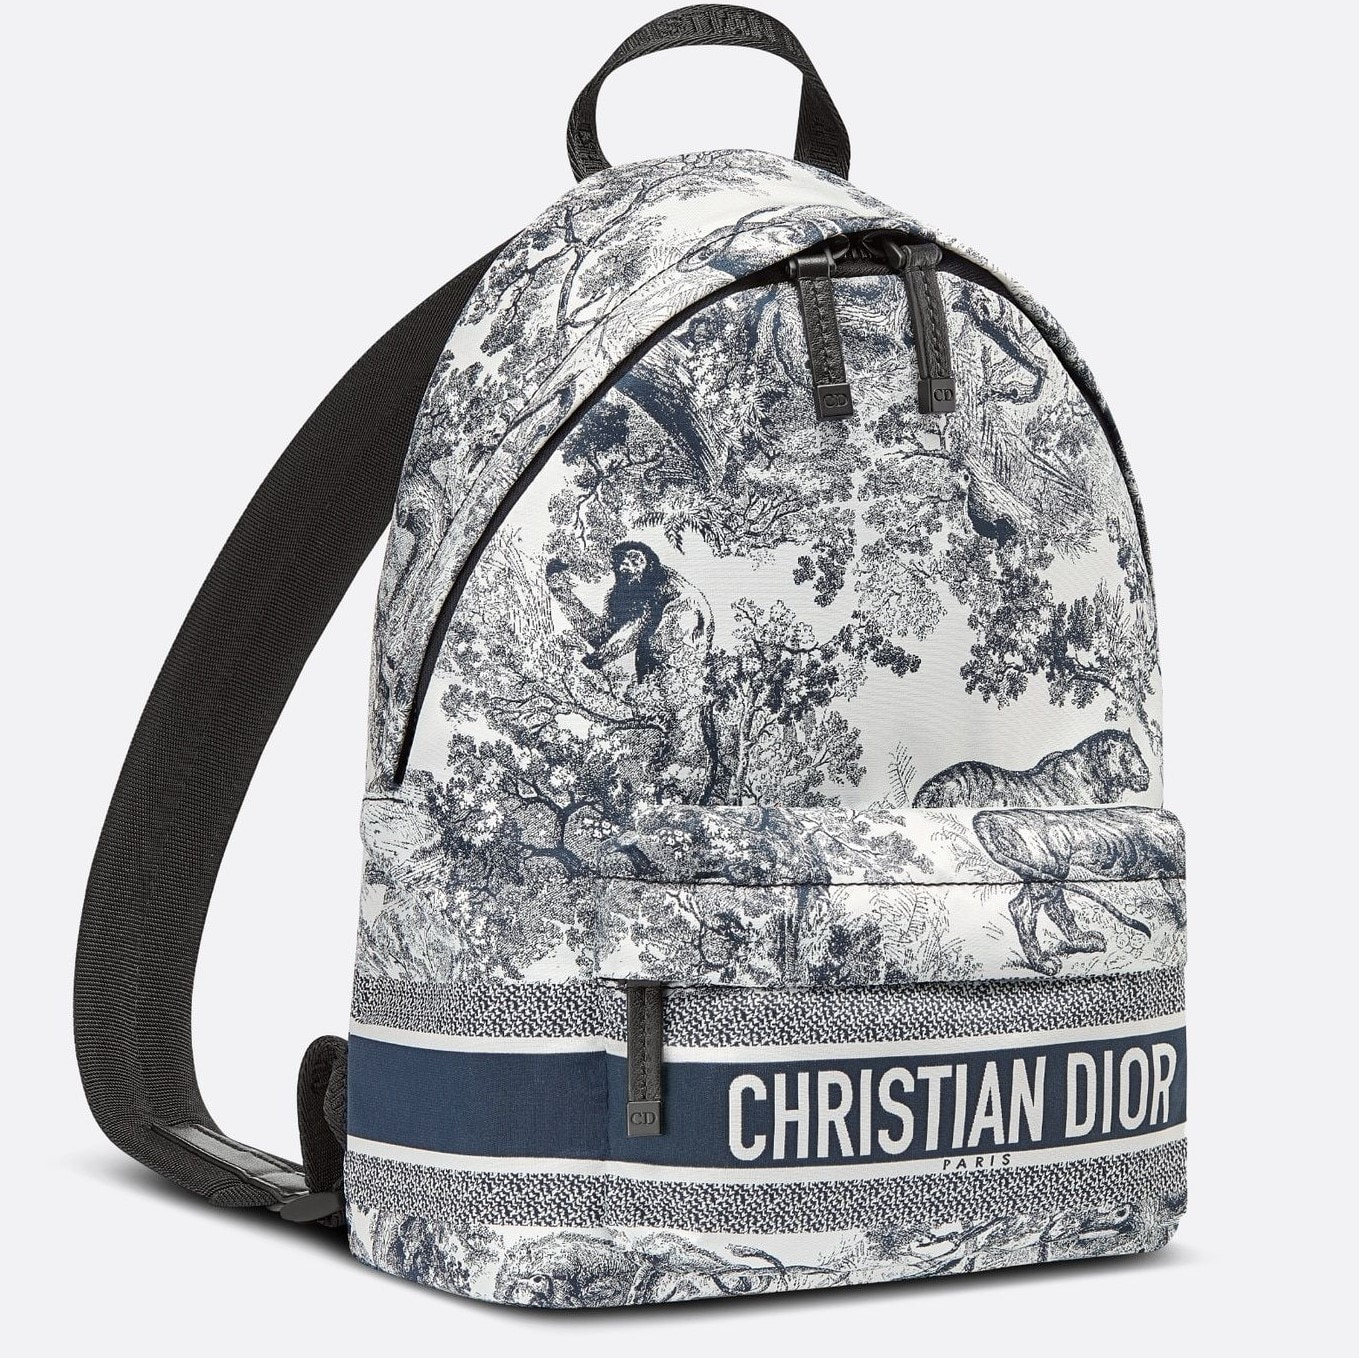 BALO UNISEX DIOR SMALL DIORTRAVEL BACKPACK 10